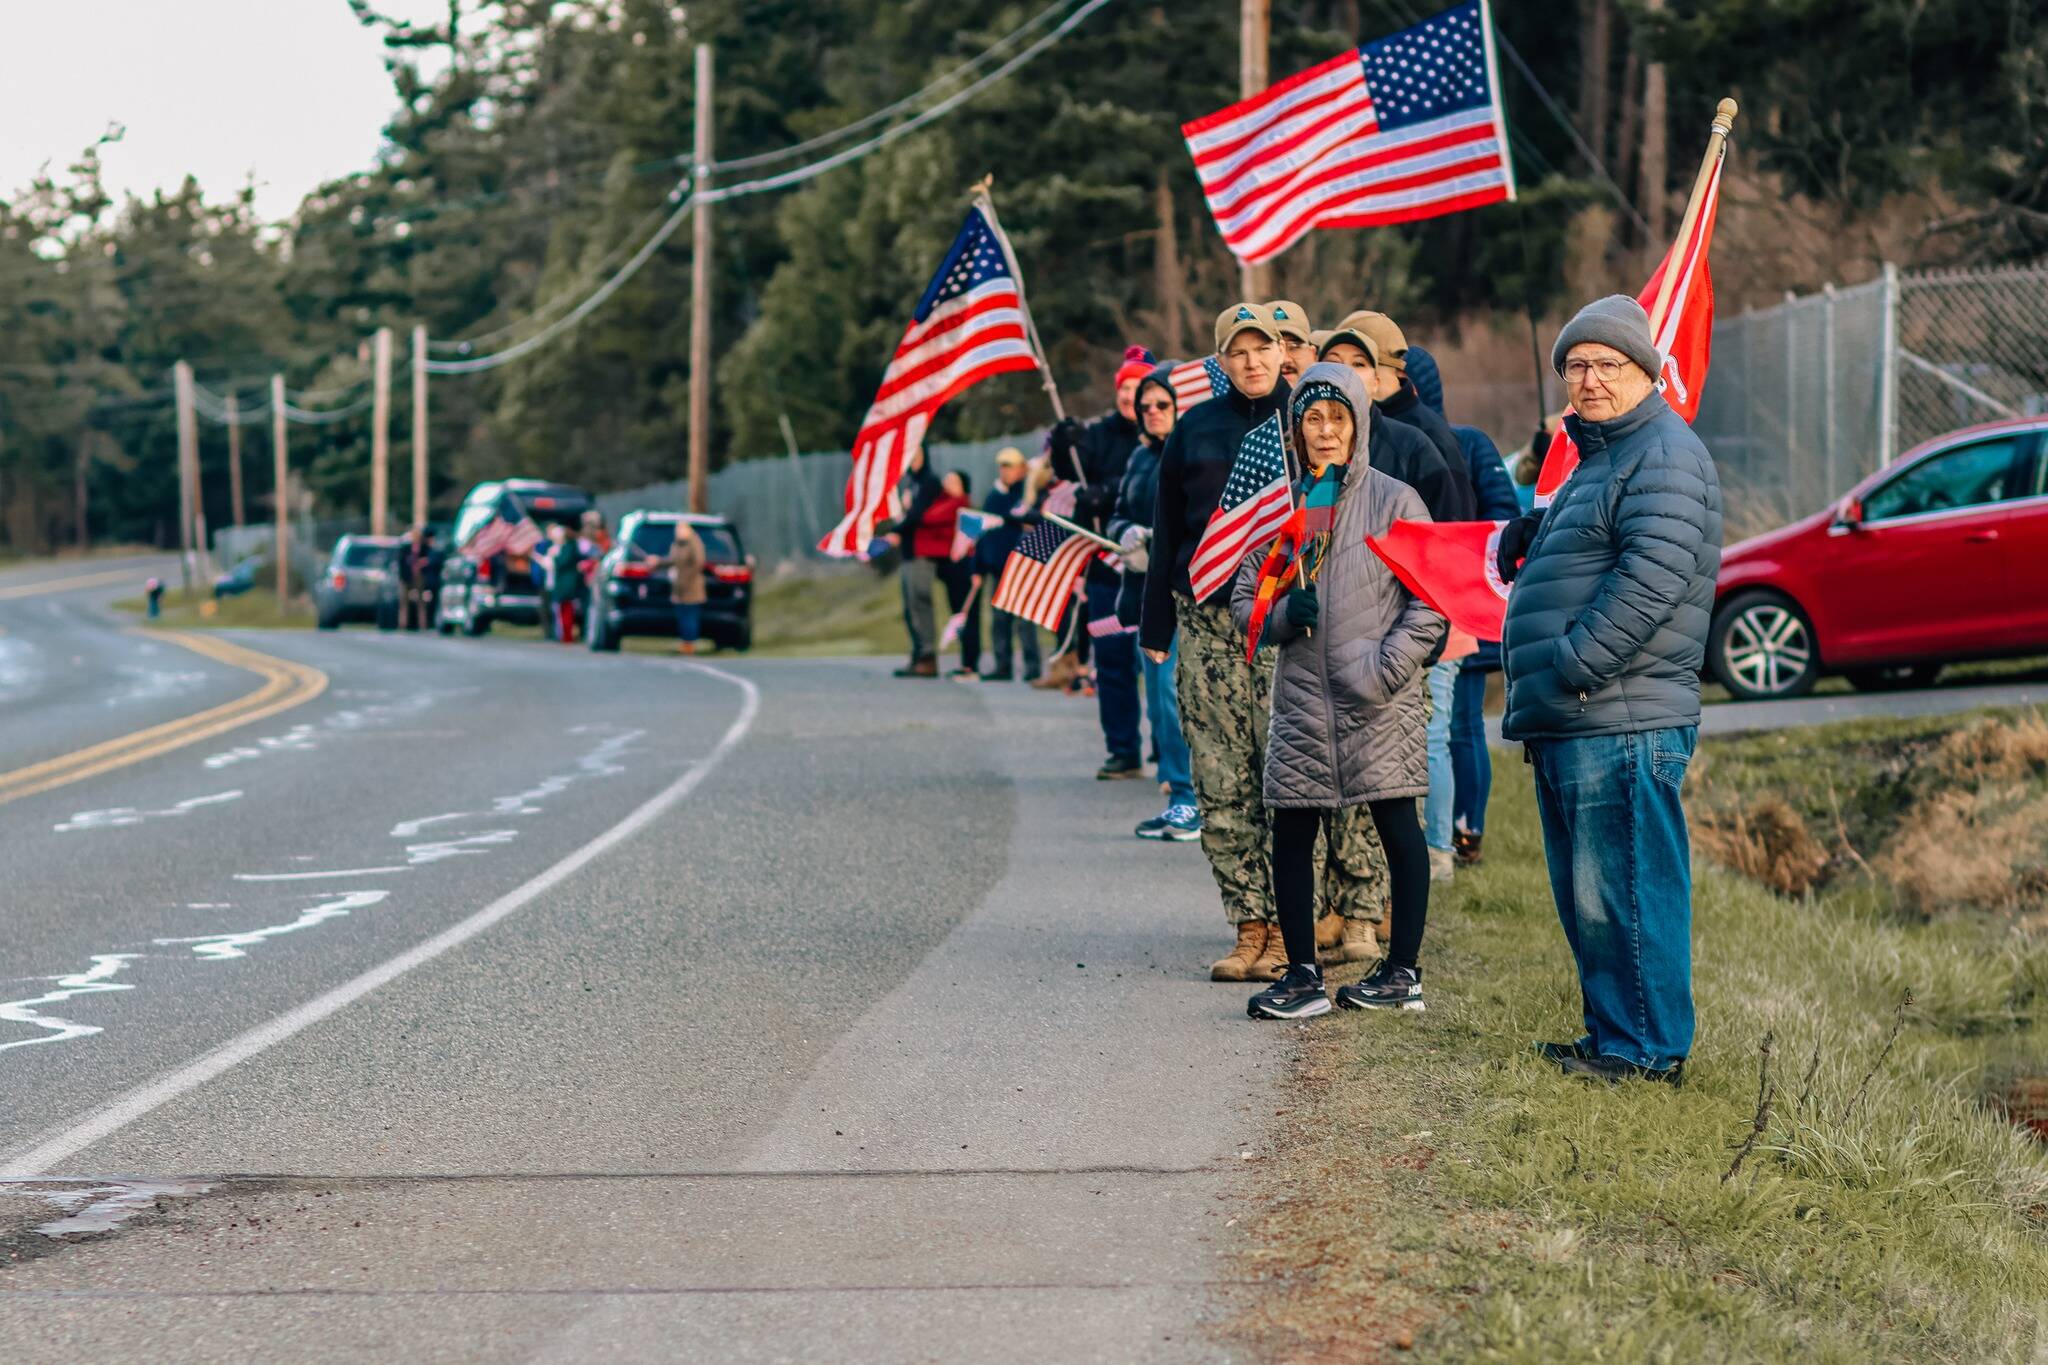 Photo courtesy of Felicia Warrington
Oak Harbor residents rally to support Donovan Davis at his funeral procession on Friday.